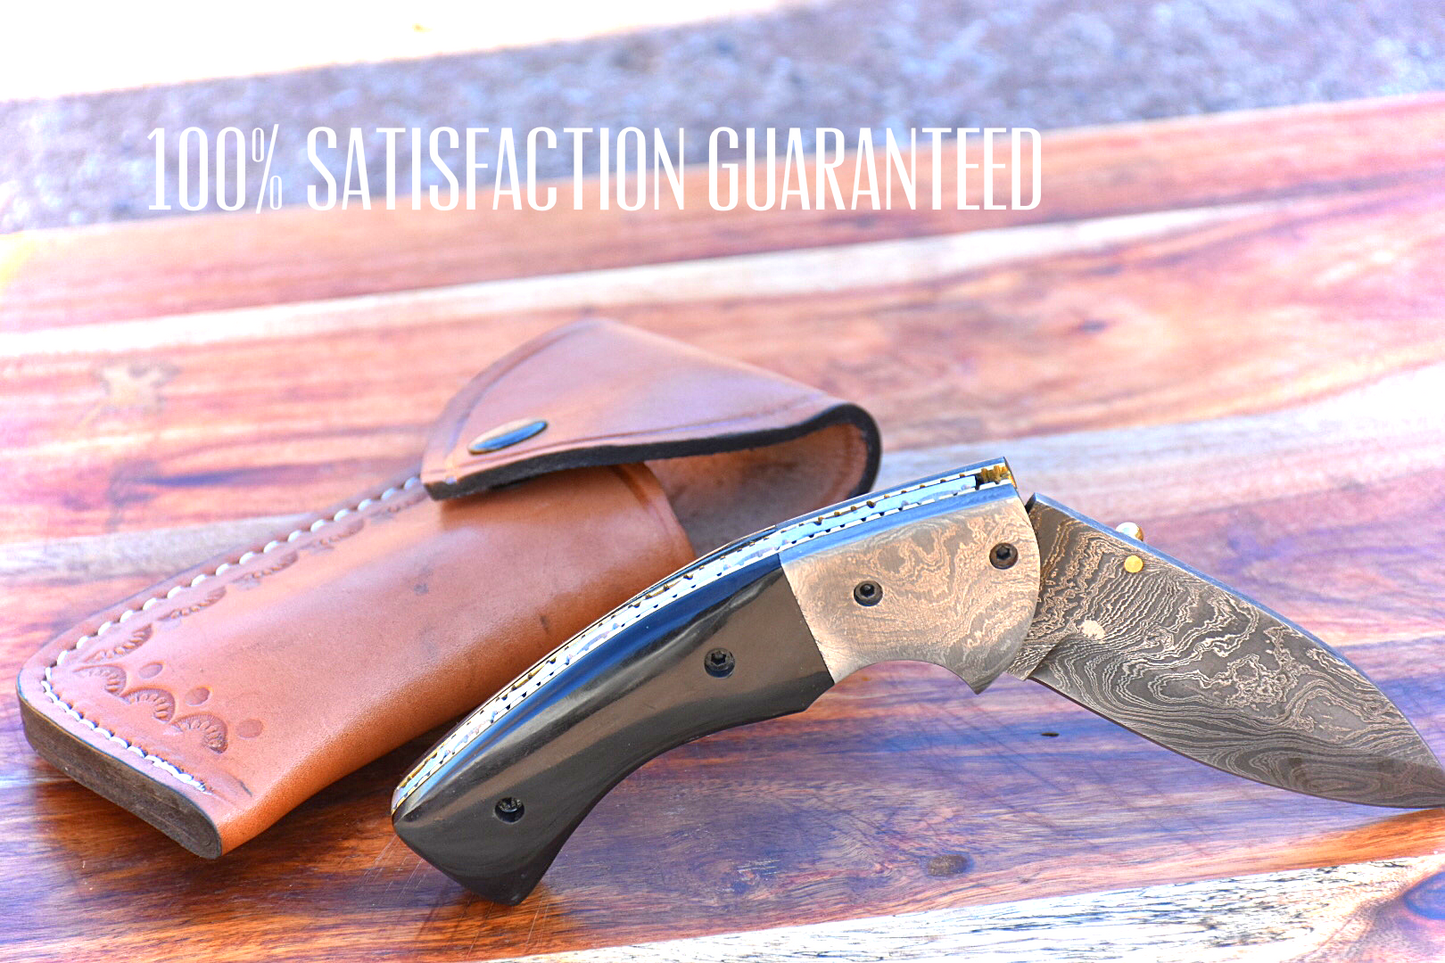 Crafted Custom Damascus Steel Folding Knife - Exquisite Buffalo Horn Handle and Complimentary Sheath